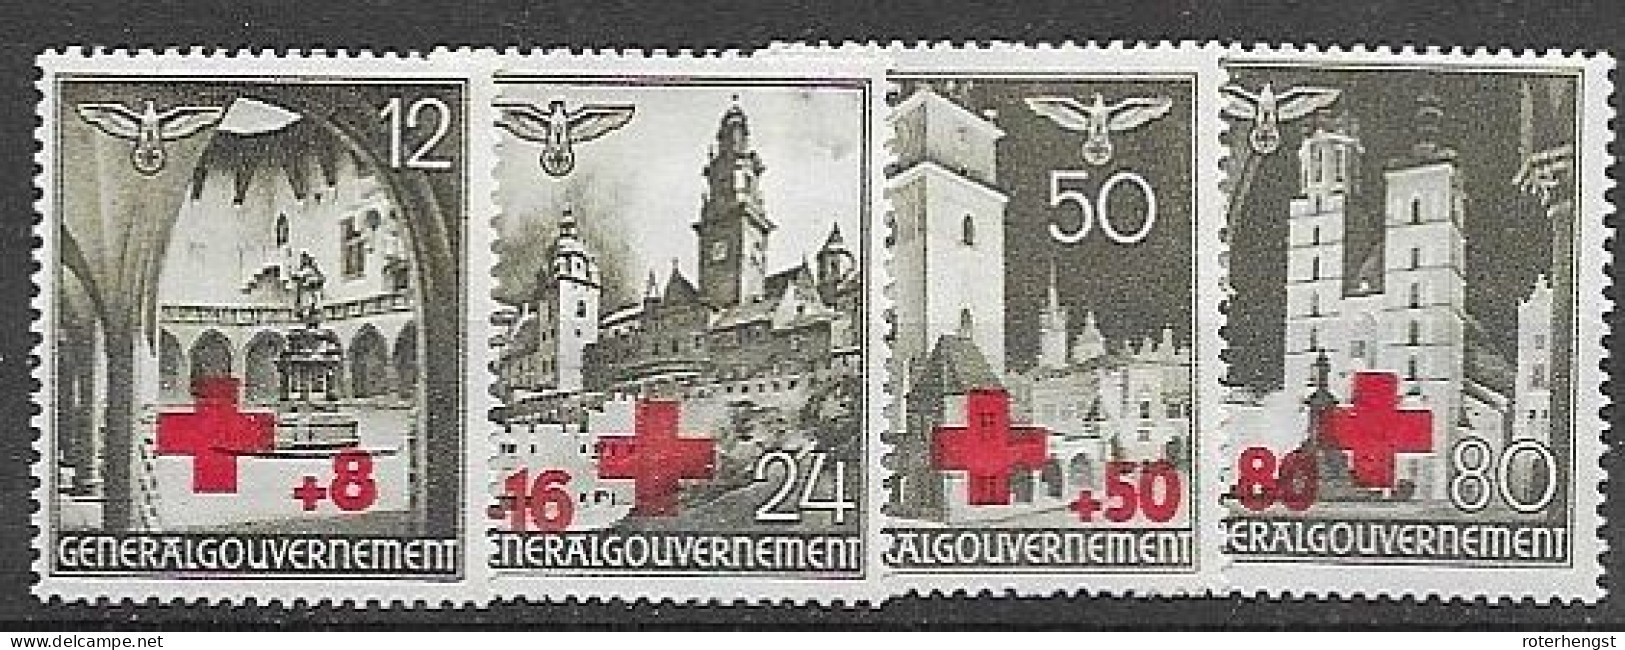 Generalgouvernement Mh * 1940 Red Cross Set Croix Rouge - Besetzungen 1938-45